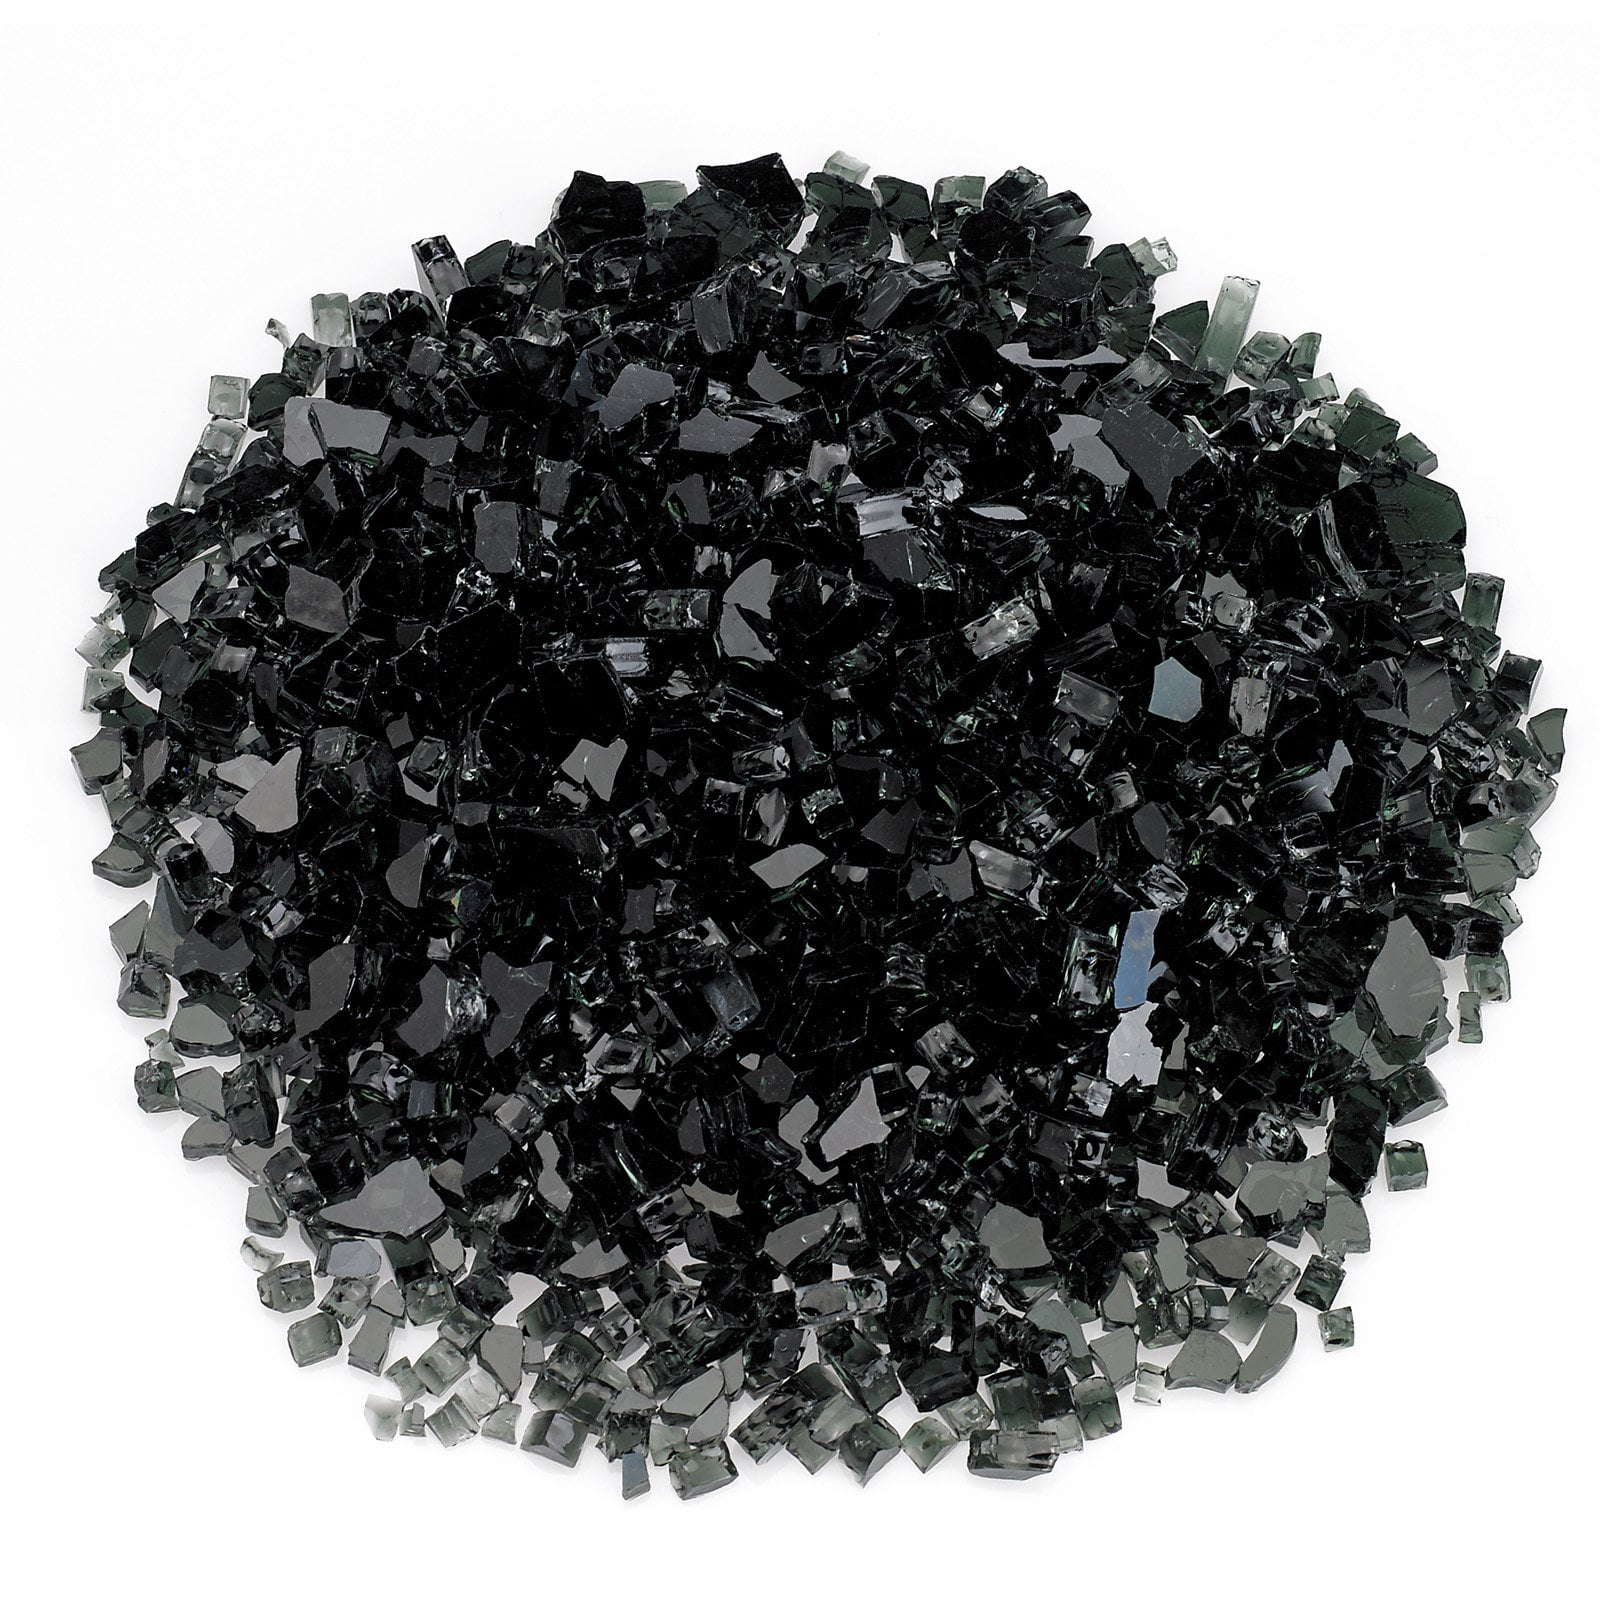 Aff-blk12-10 0.5 In. Black Fire Glass - 10 Lbs